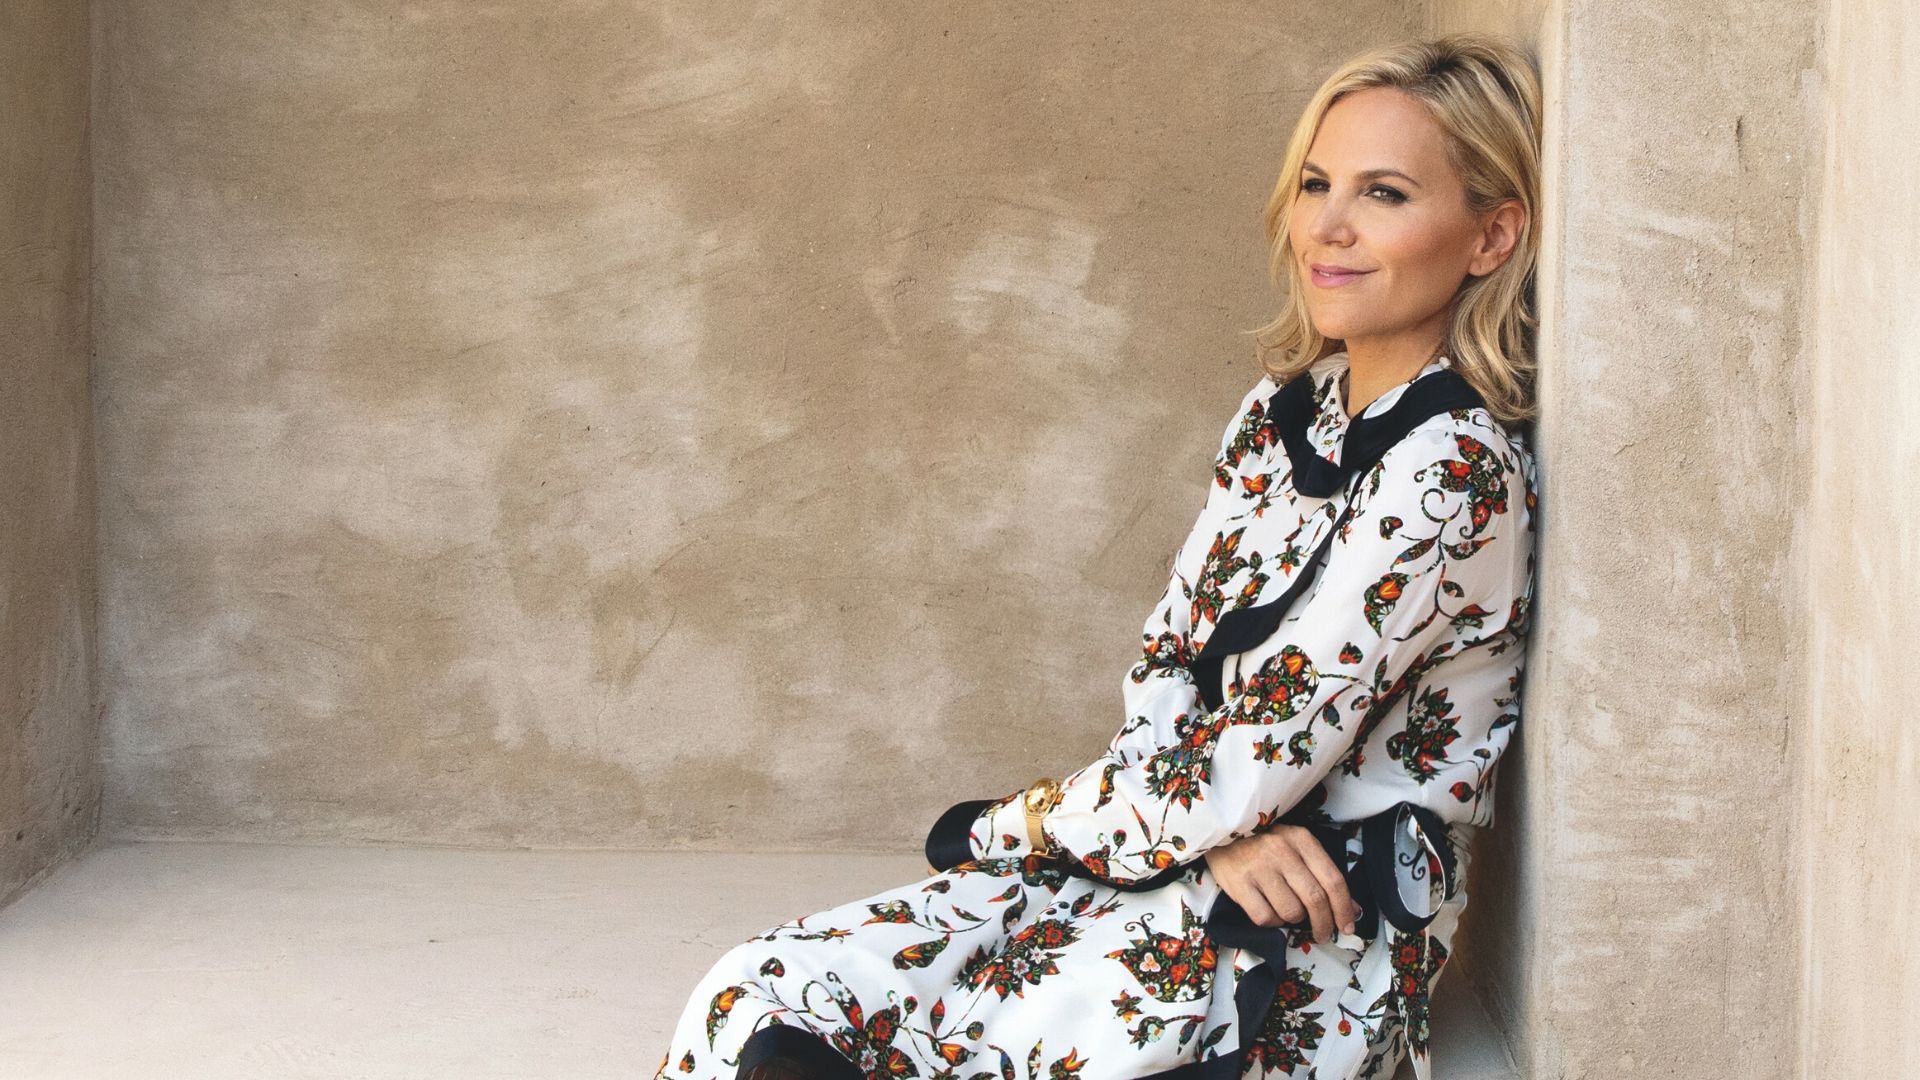 Women's Day Interview with Tory Burch: Redefine and Embrace 'Ambition